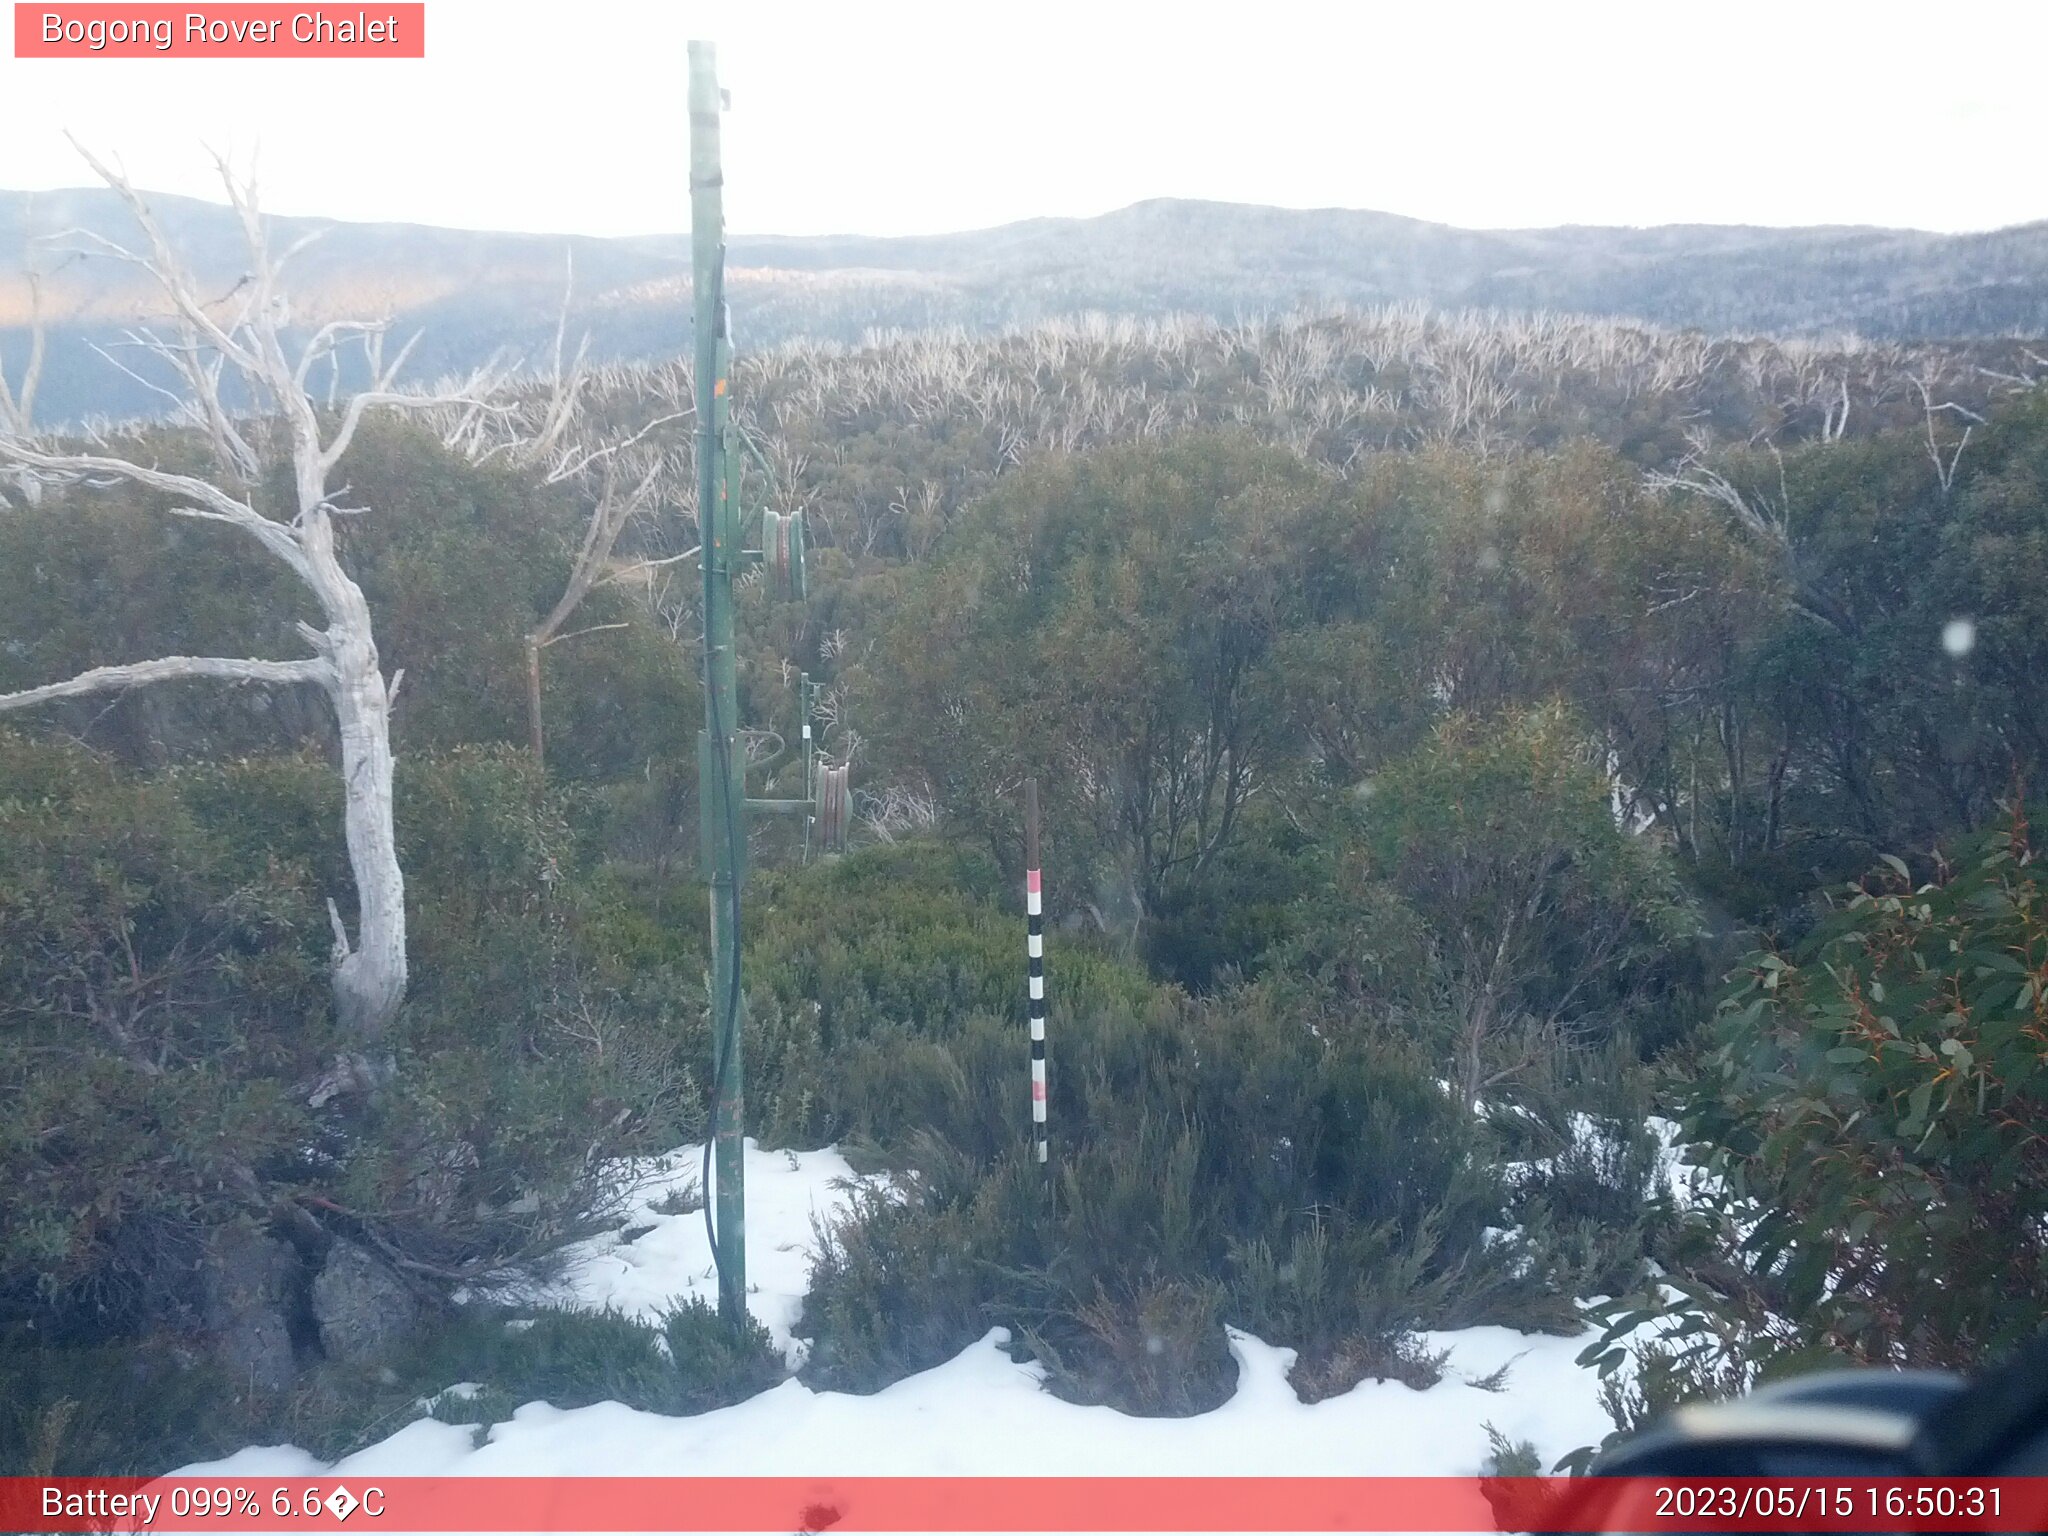 Bogong Web Cam 4:50pm Monday 15th of May 2023